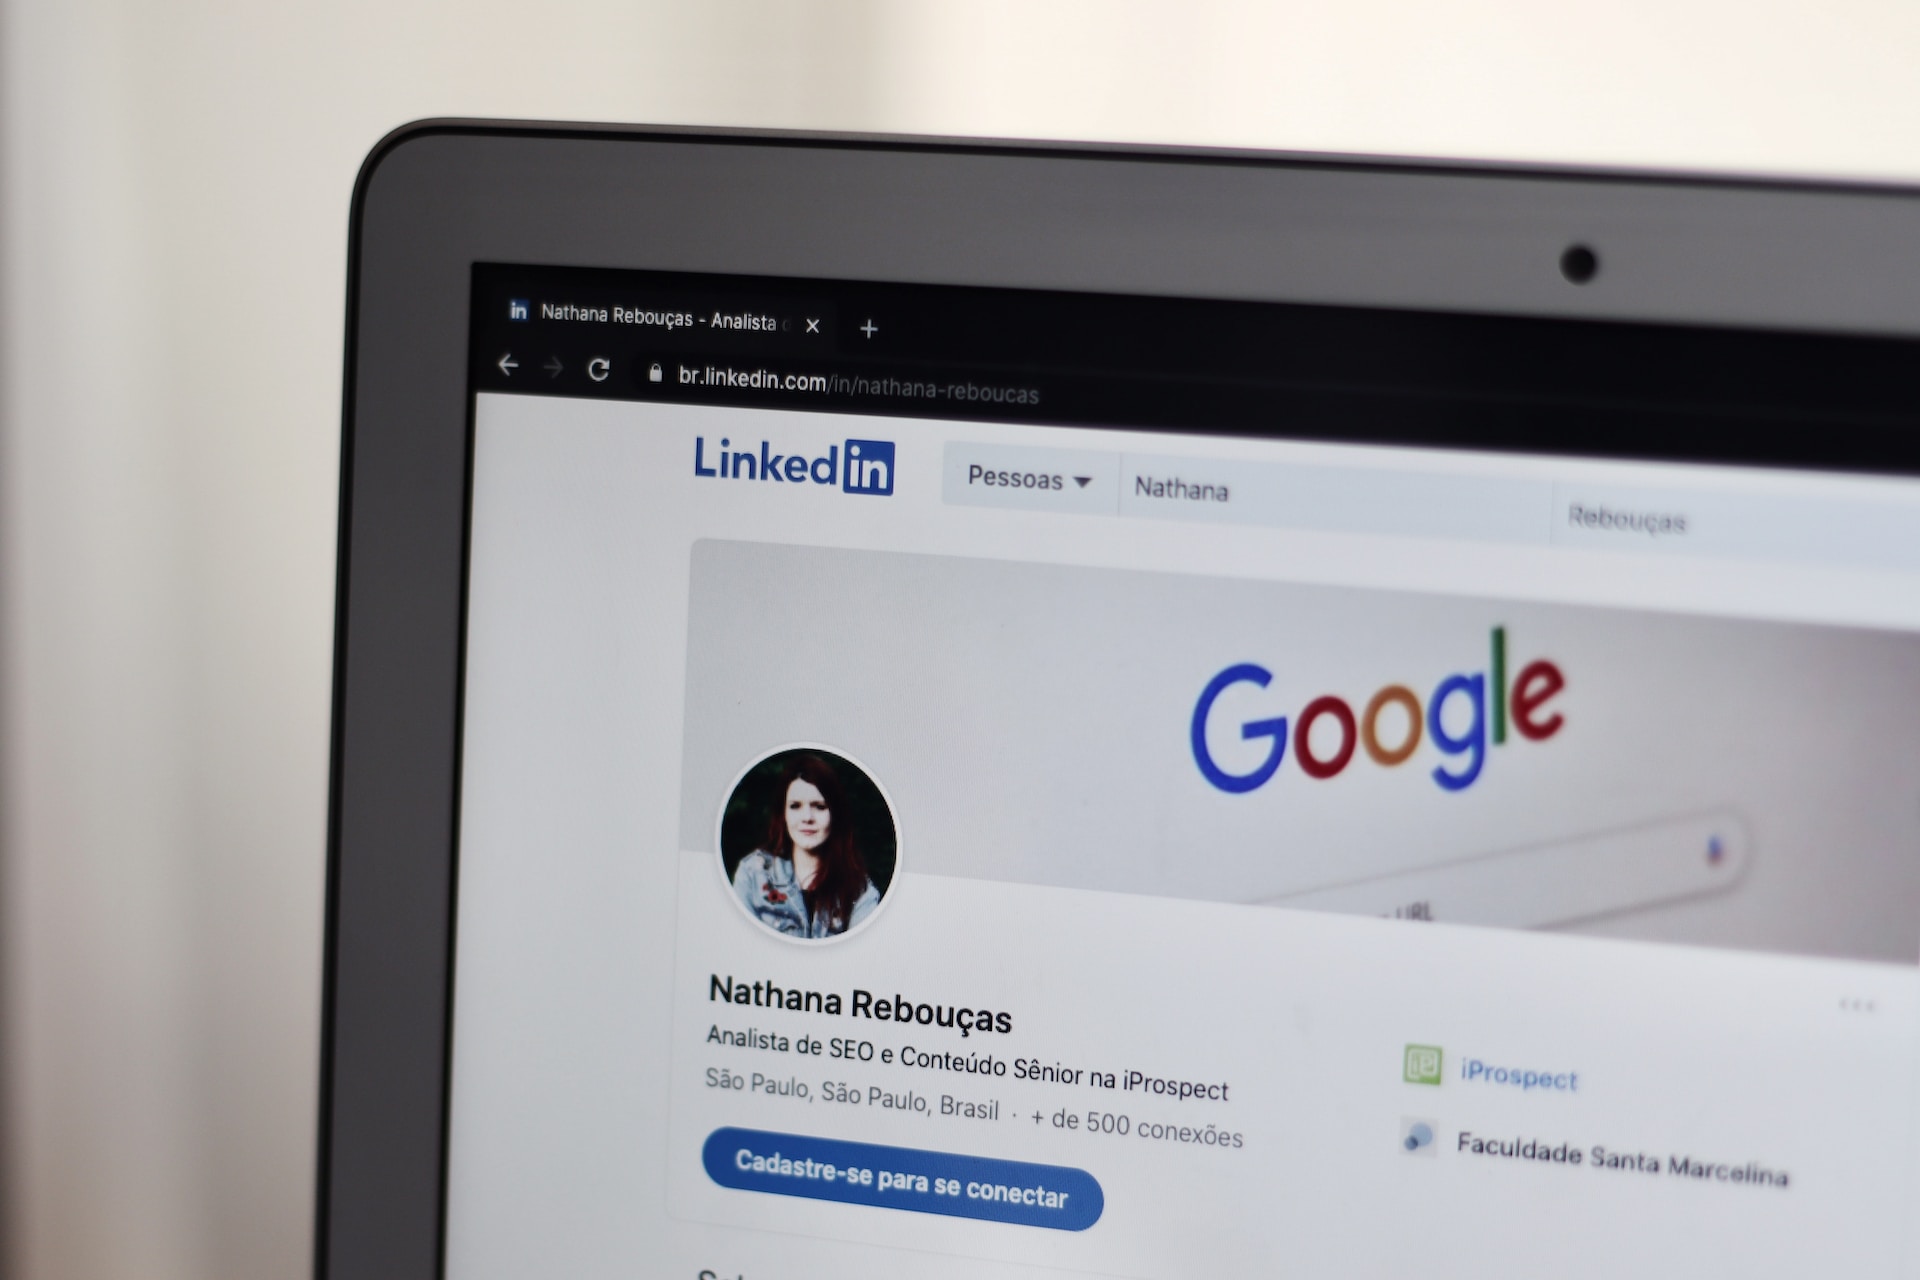 Upper right corner of a laptop showing a woman’s LinkedIn profile, with the Google homepage as cover picture